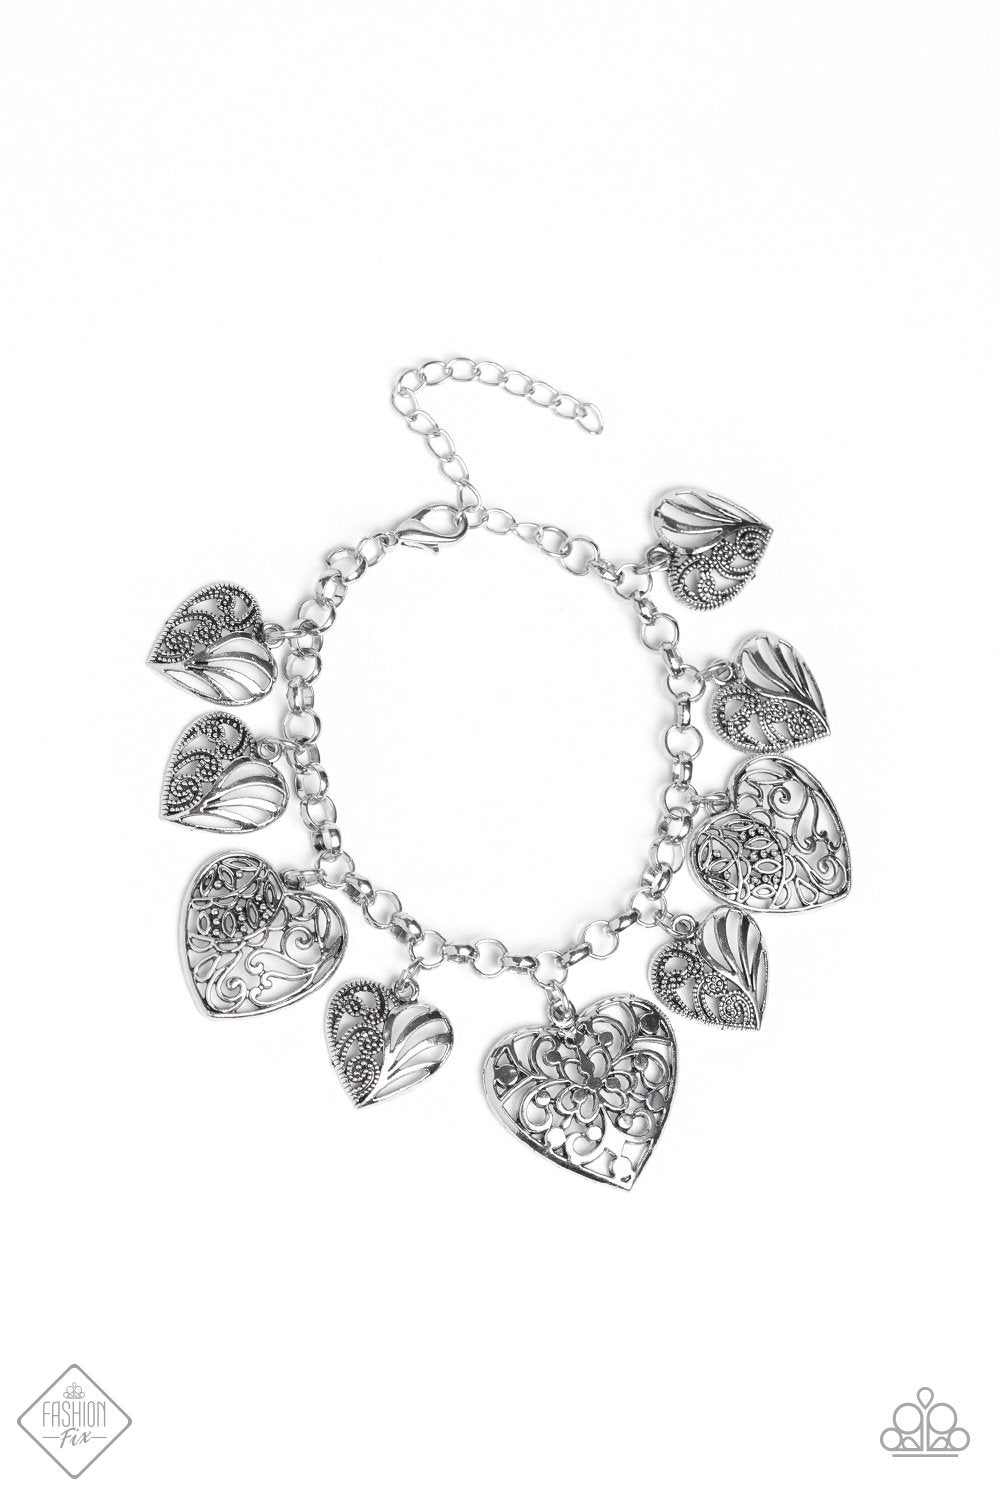 Completely Devoted Silver Heart Bracelet - Paparazzi Accessories-CarasShop.com - $5 Jewelry by Cara Jewels